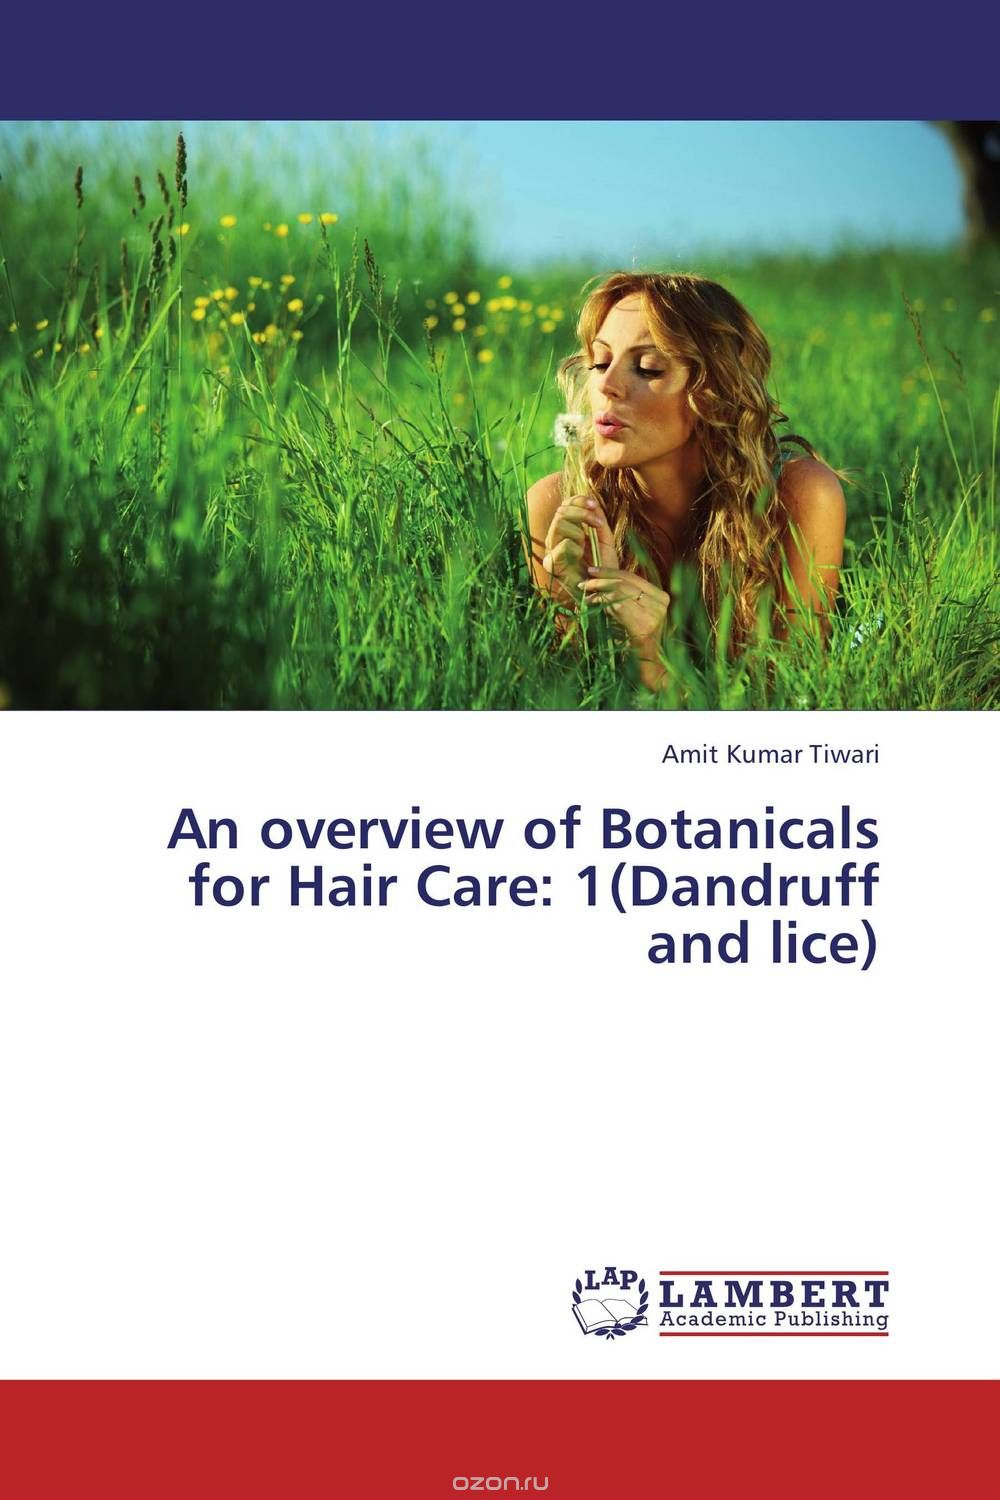 Скачать книгу "An overview of Botanicals for Hair Care: 1(Dandruff and lice)"